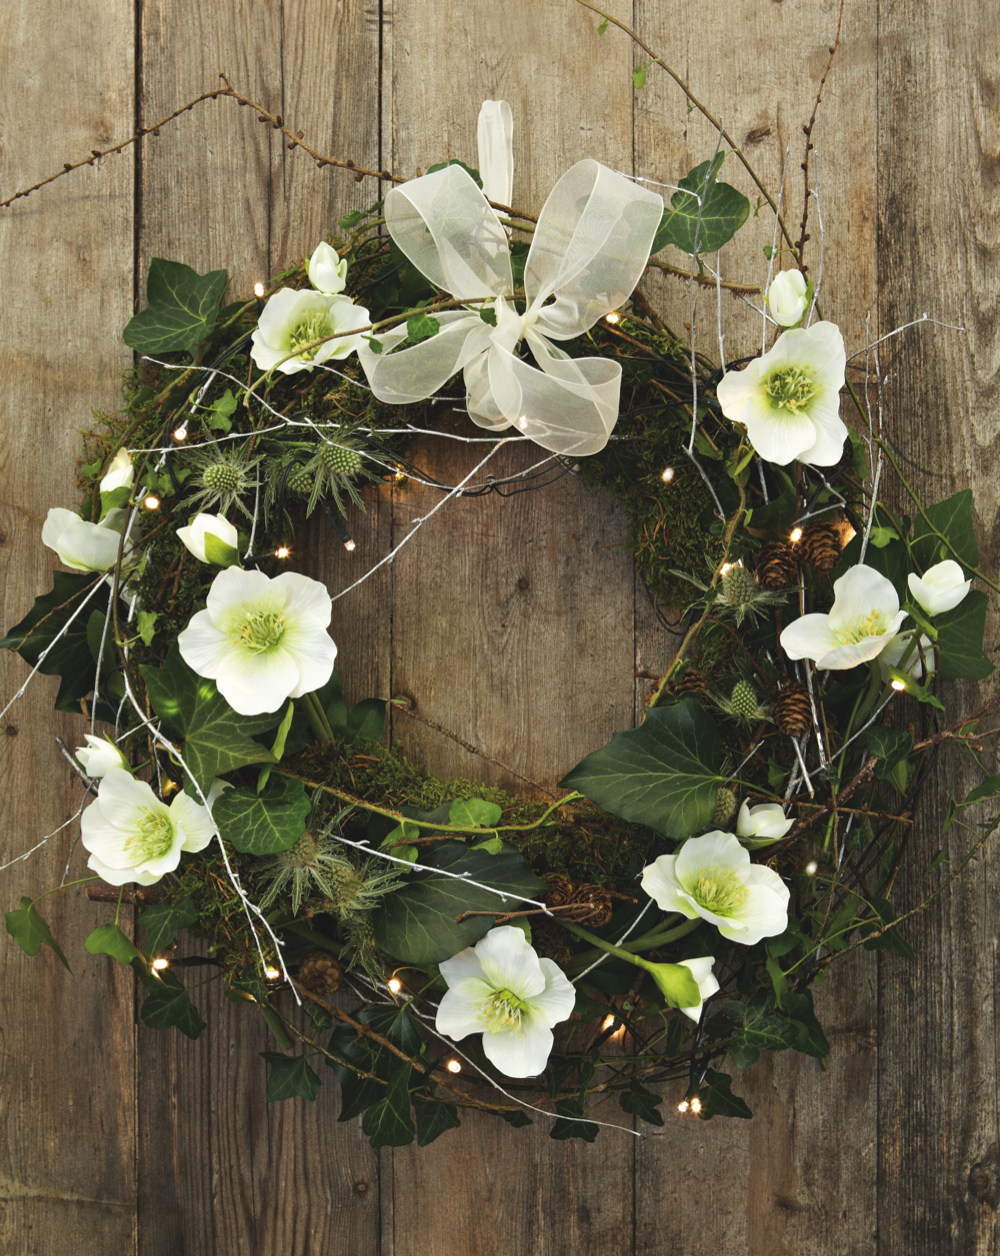 Homemade Christmas wreath with fresh flowers, foraged greenery and white bow